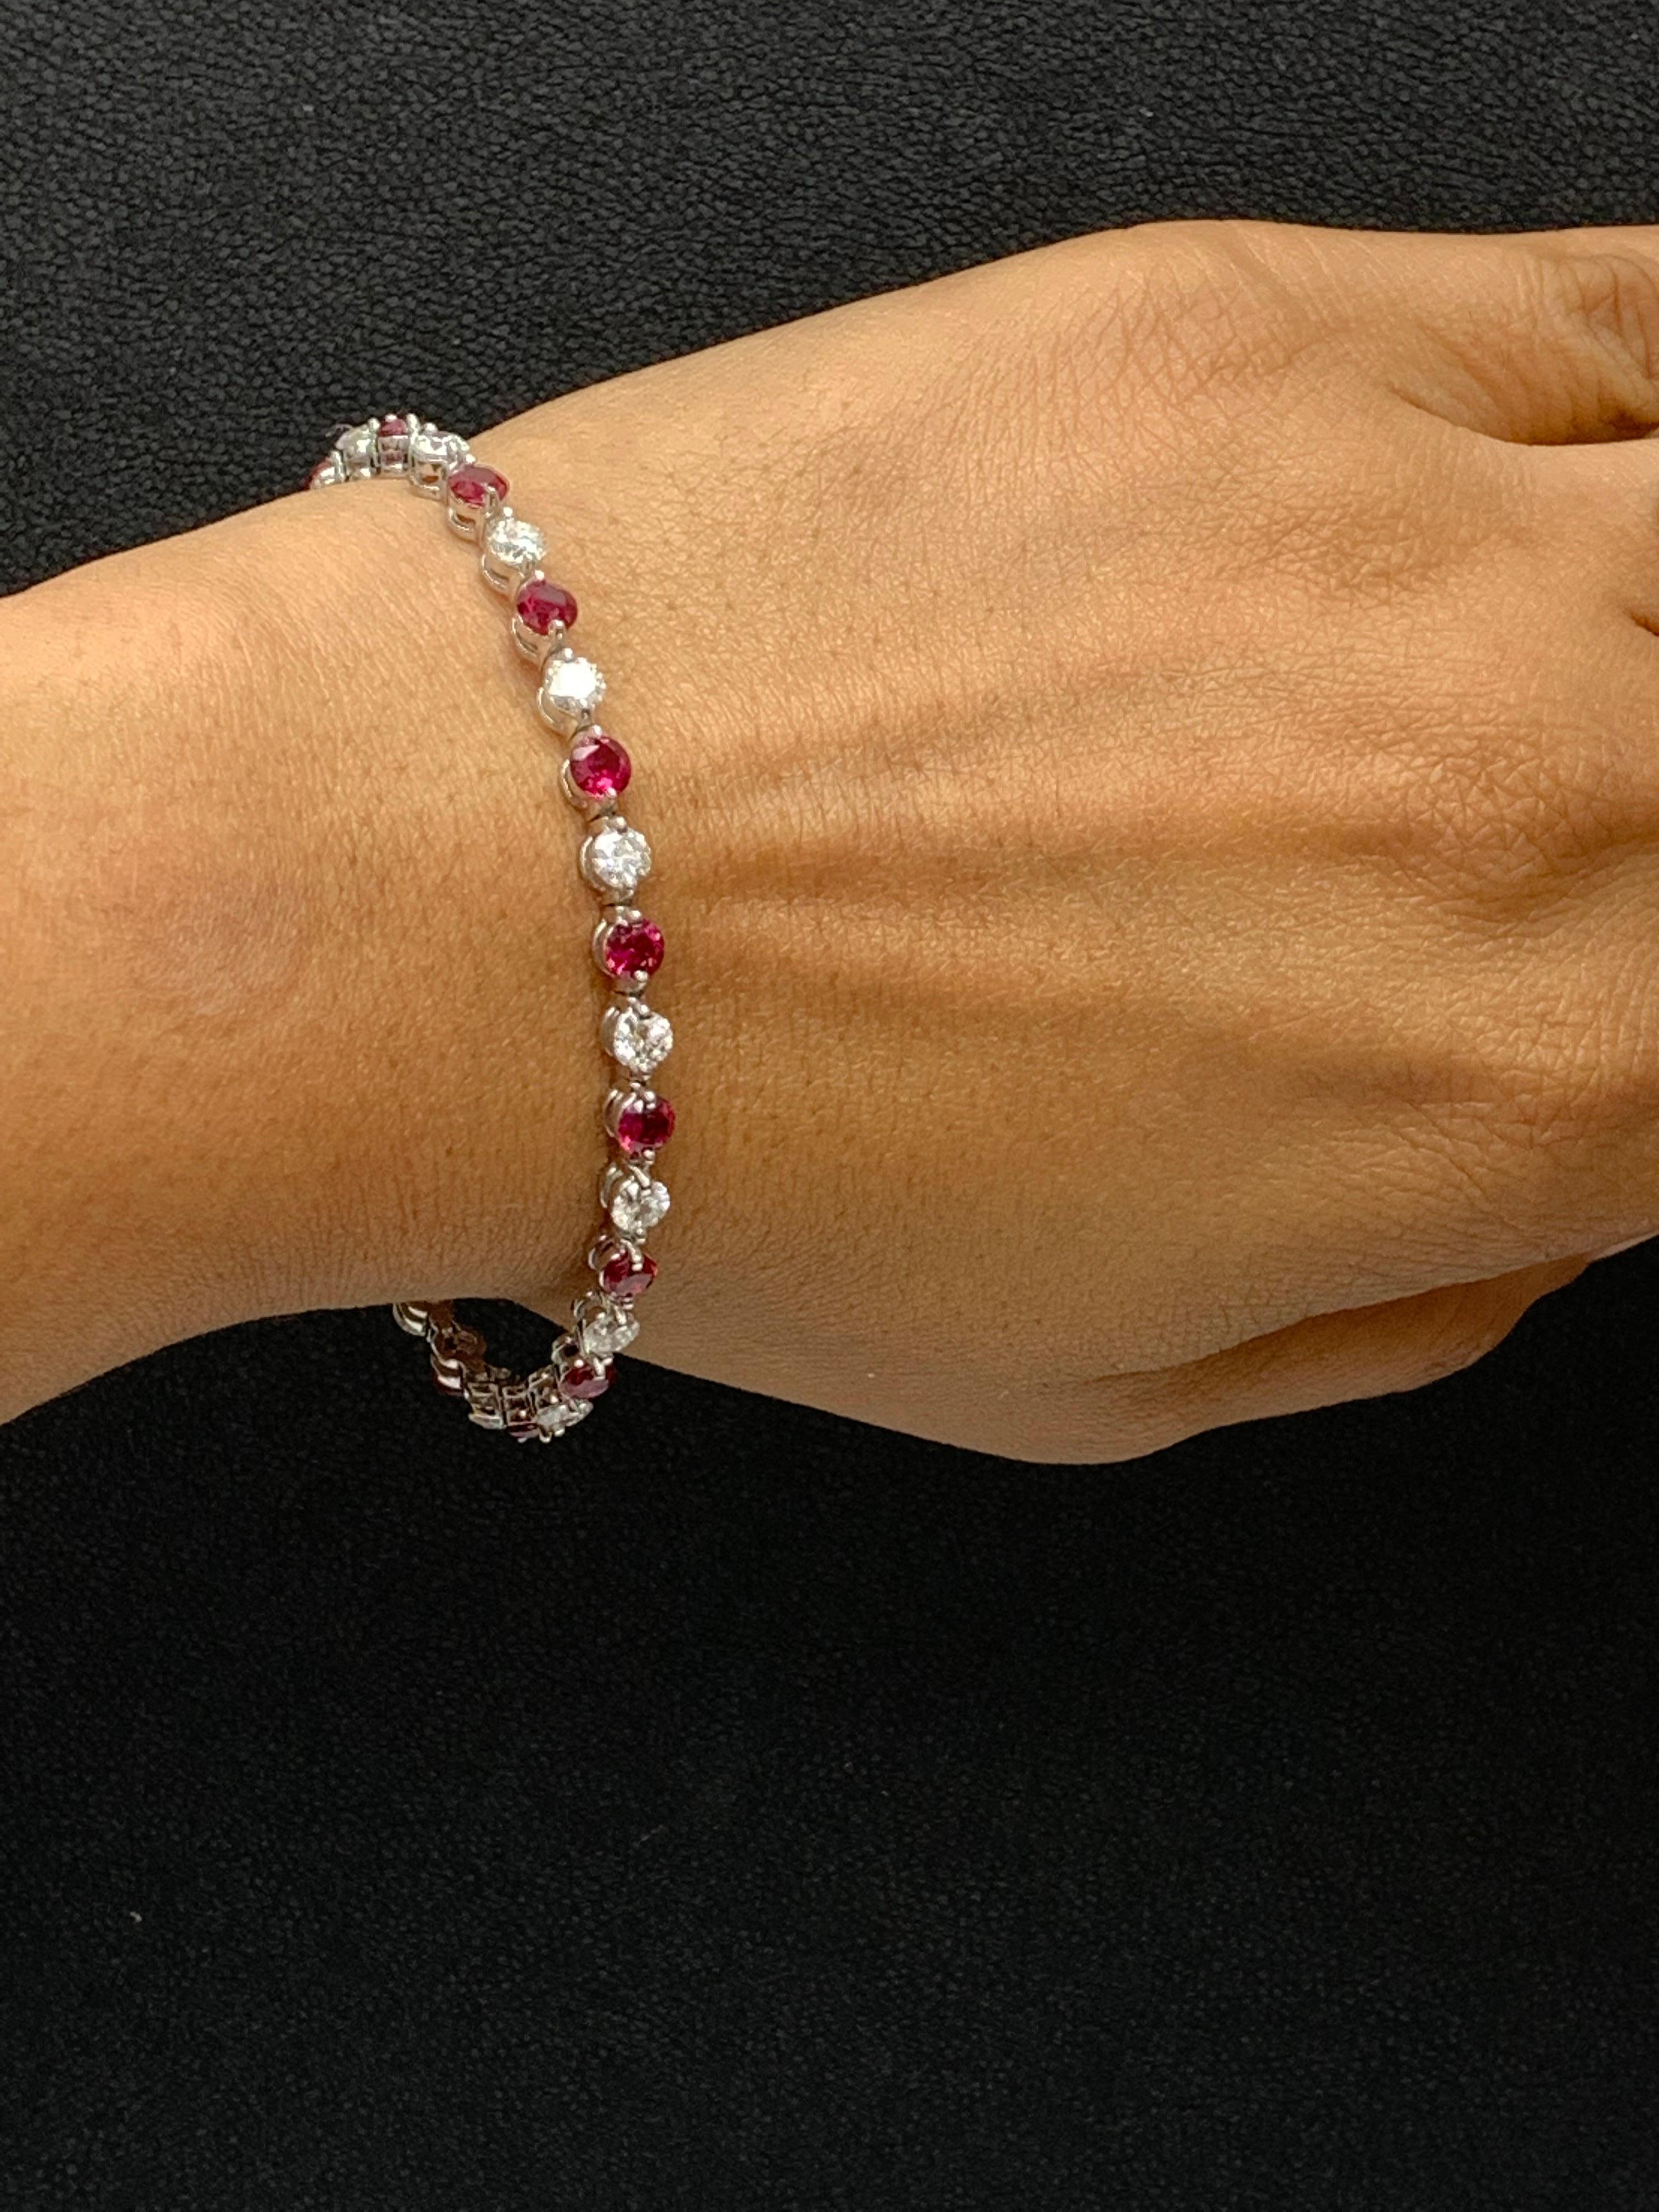 Round Cut 4.55 Carat Round Ruby and Diamond Bracelet in 14k White Gold For Sale